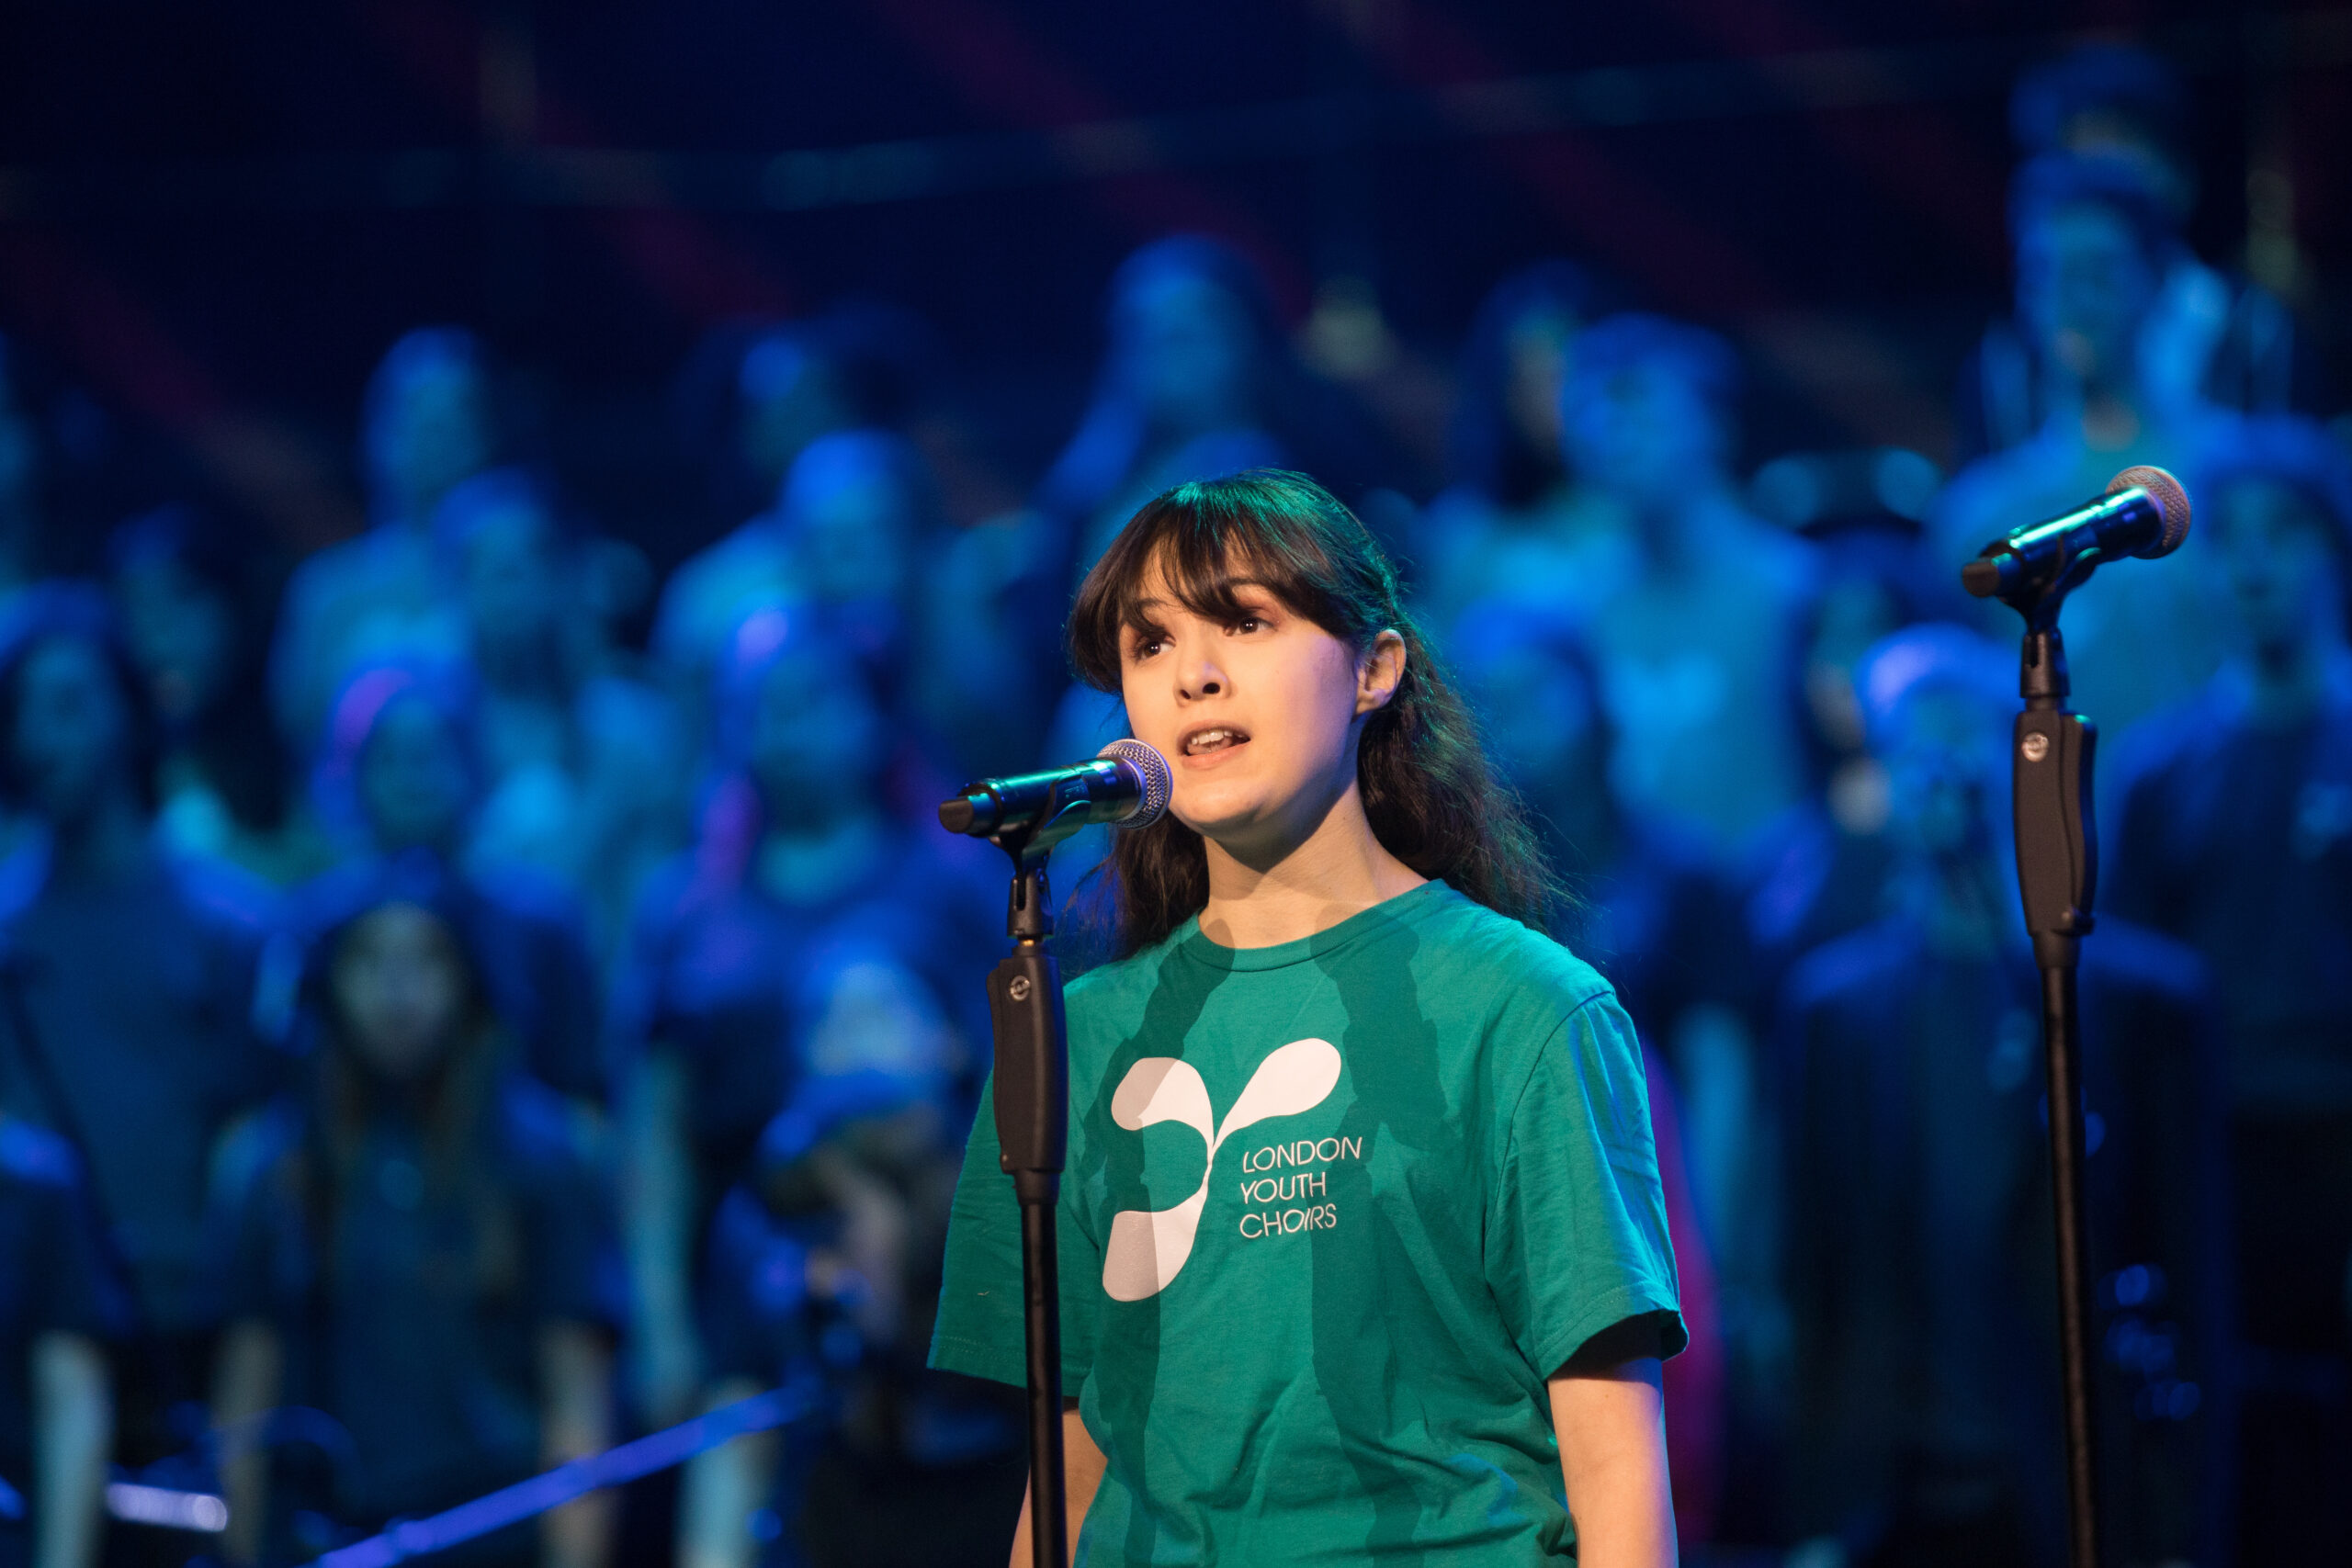 LYC member Grace wearing a teal T shirt with white LYC logo, singing into a microphone, with a choir behind under blue lighting